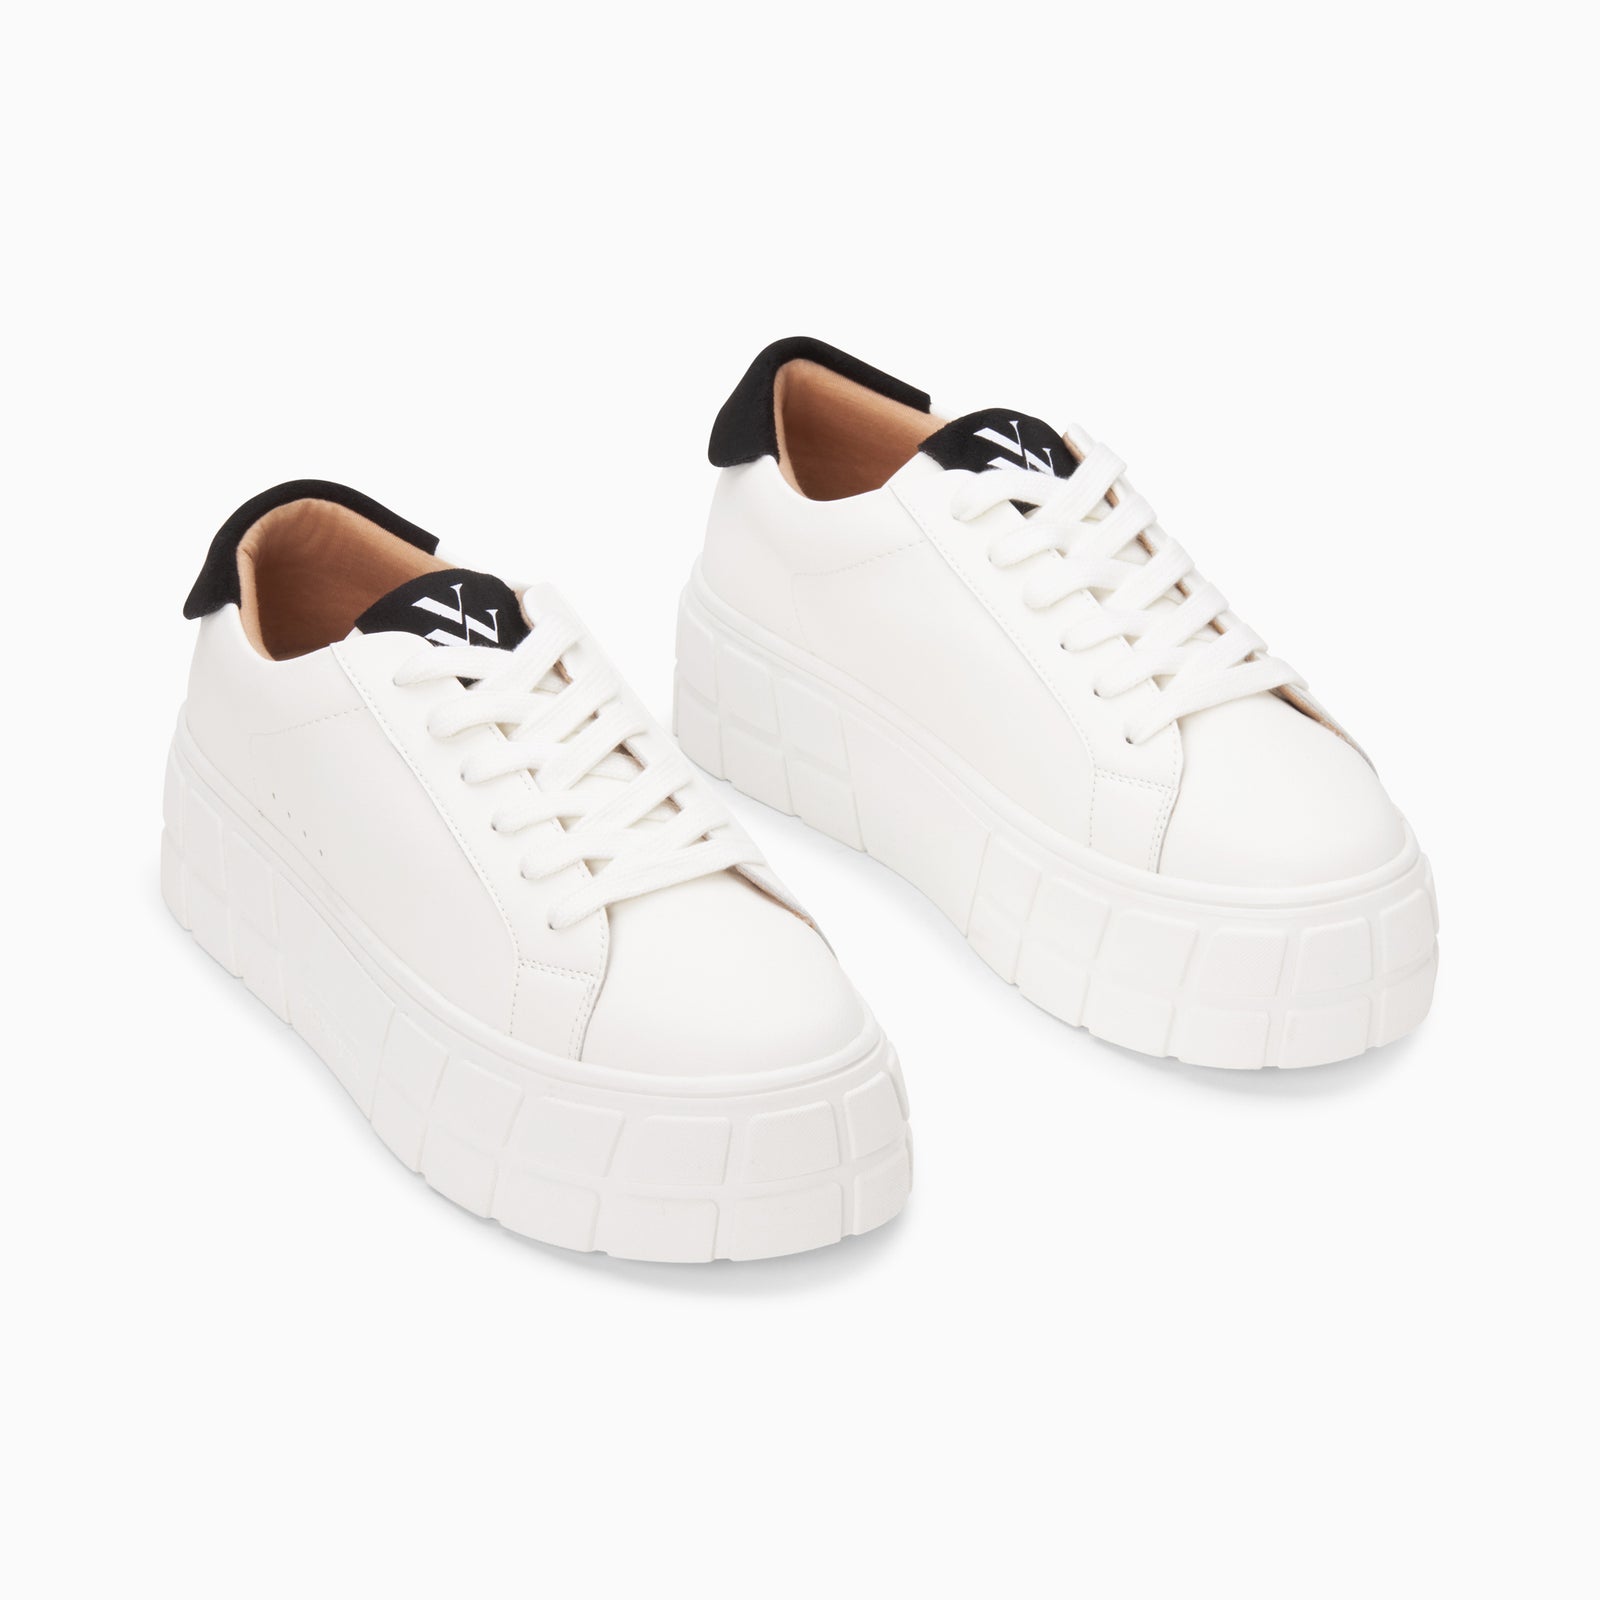 White and gold Meaghan platform sneakers • Vanessa Wu